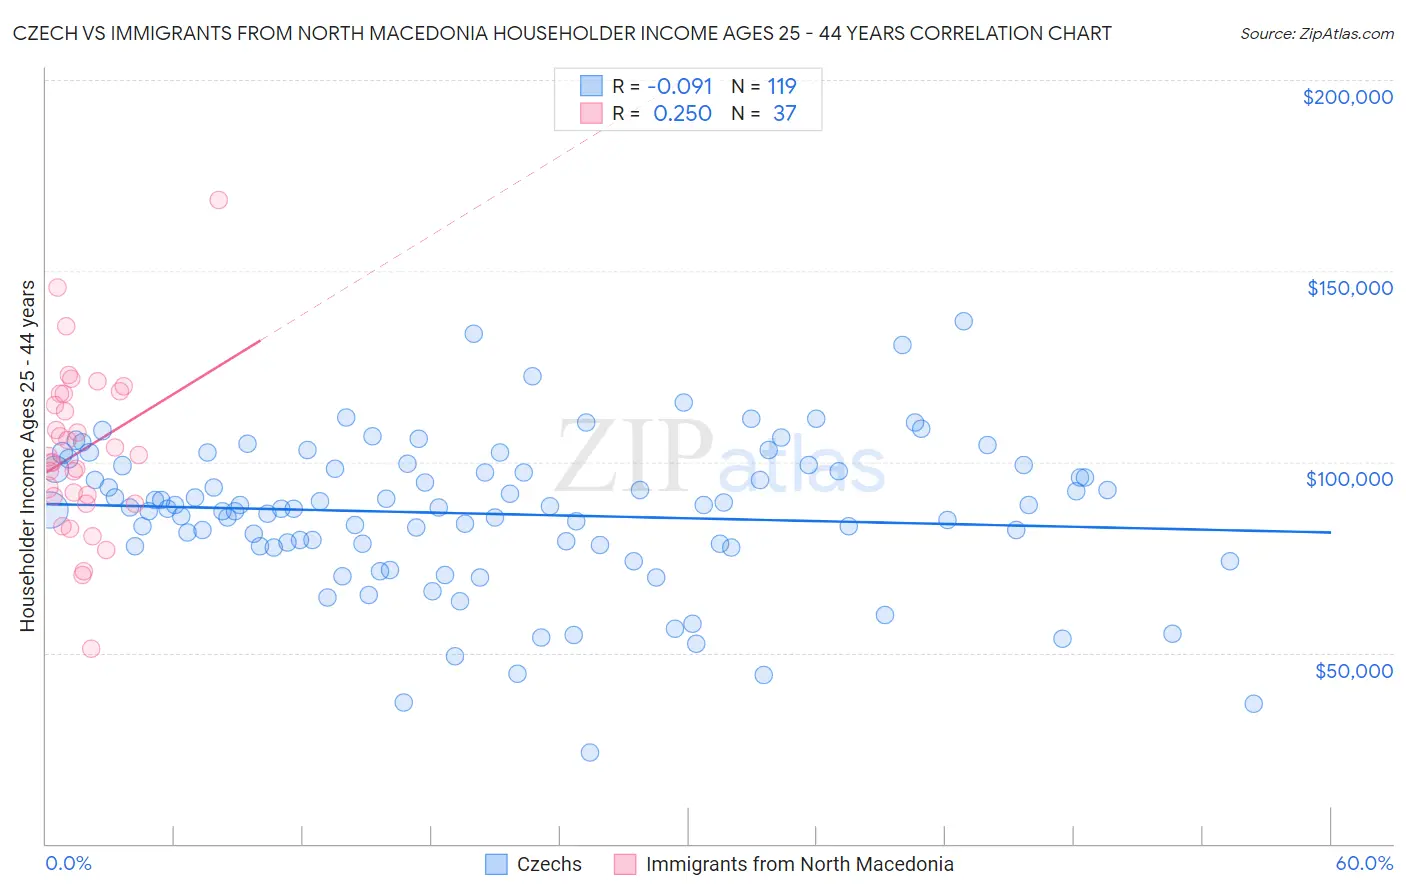 Czech vs Immigrants from North Macedonia Householder Income Ages 25 - 44 years